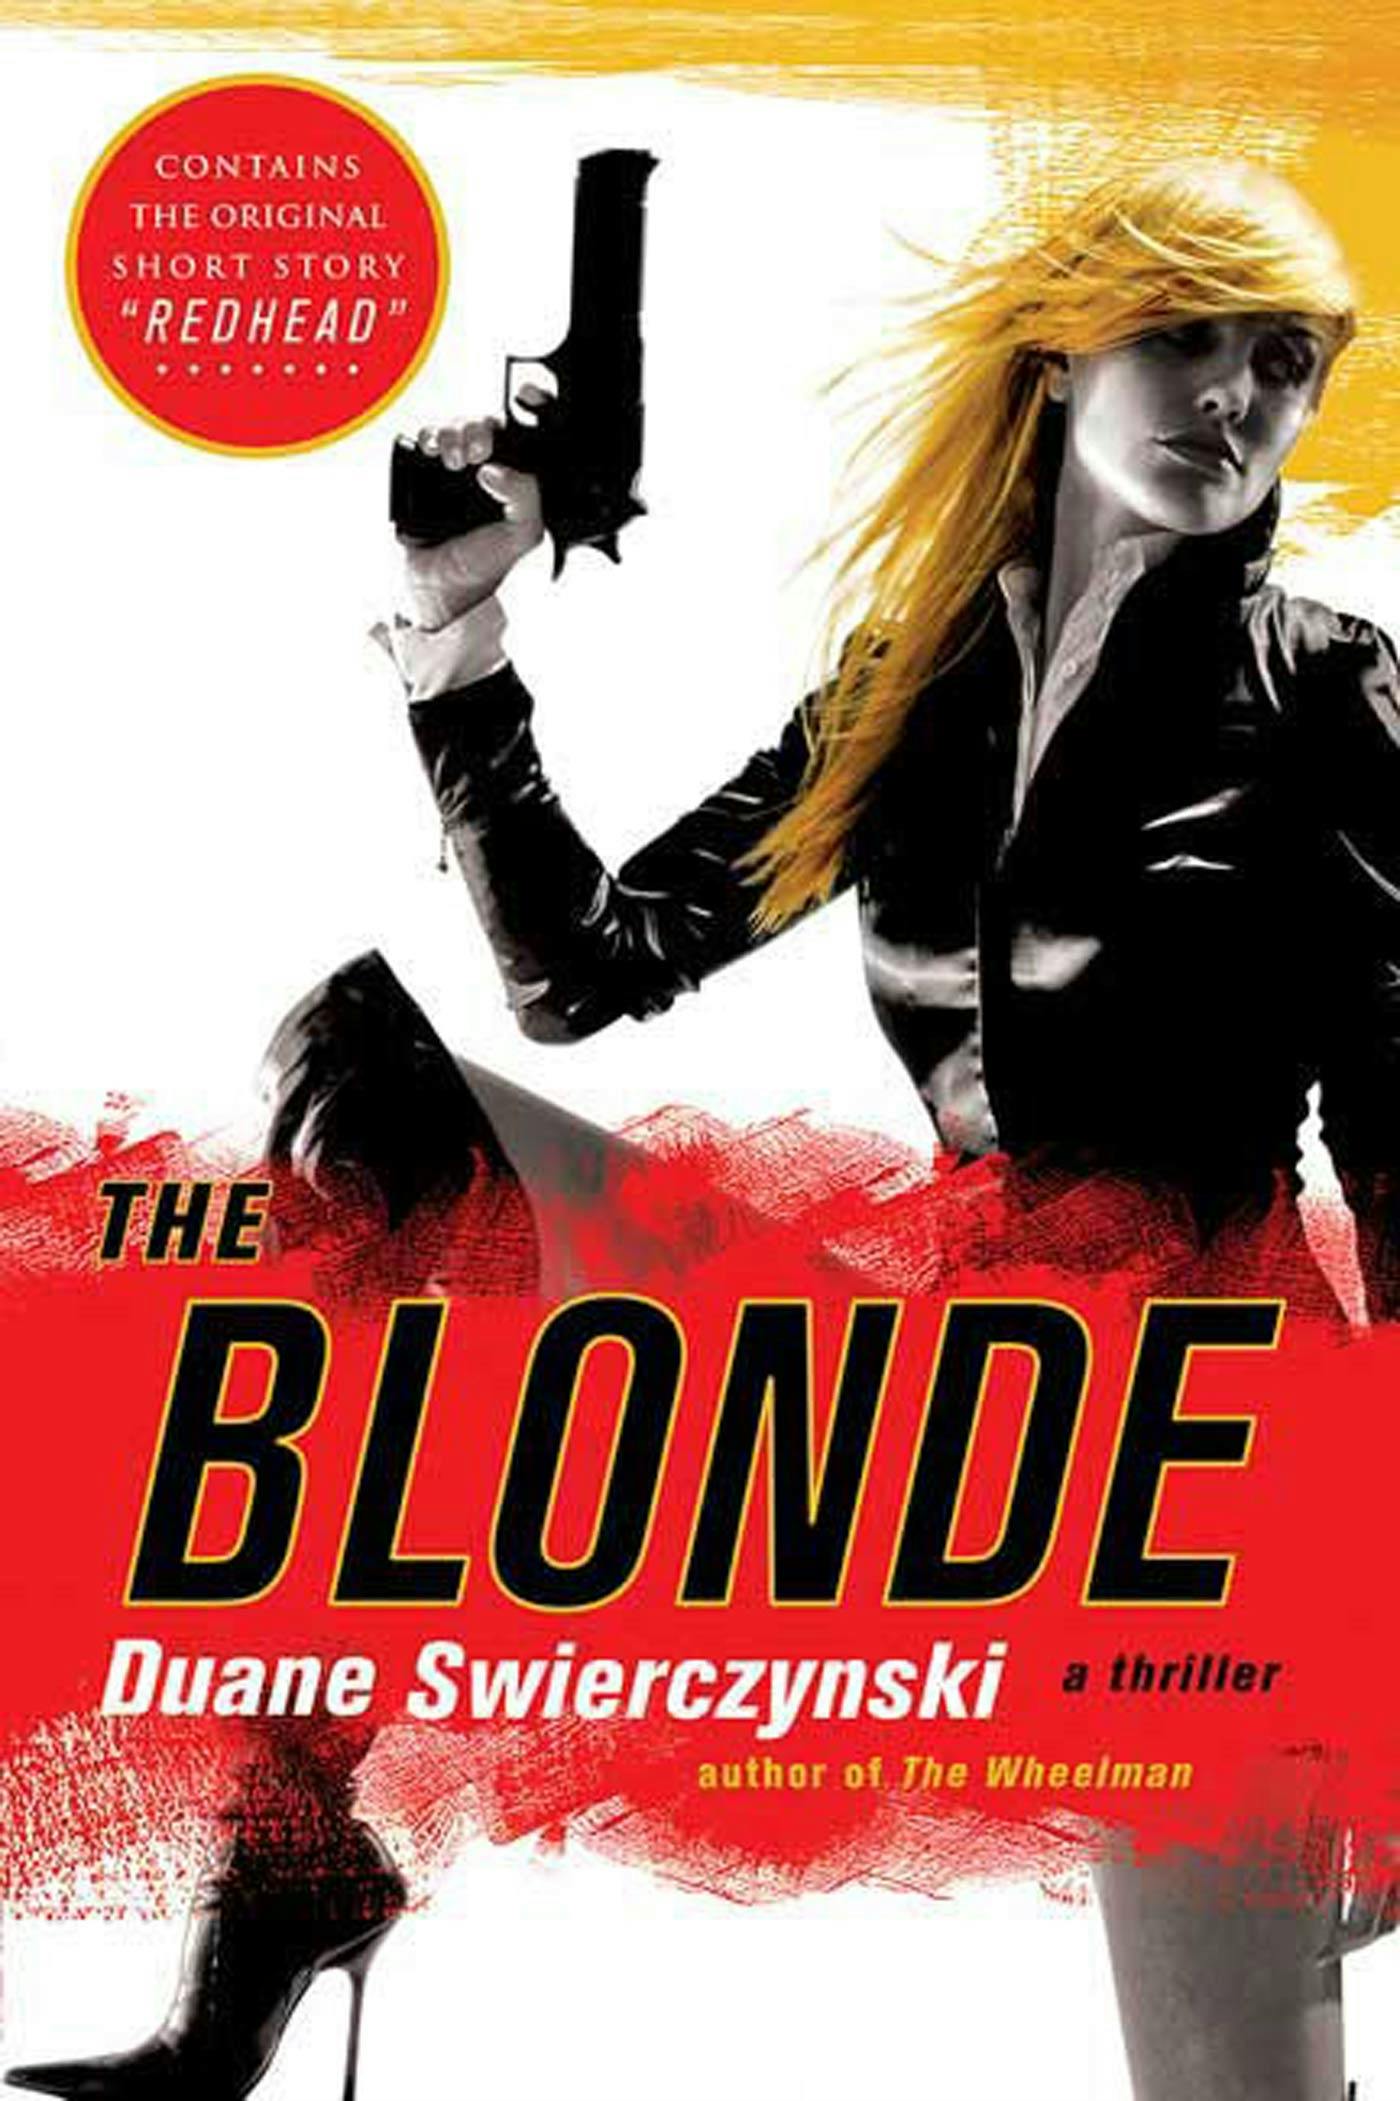 The Blonde image pic